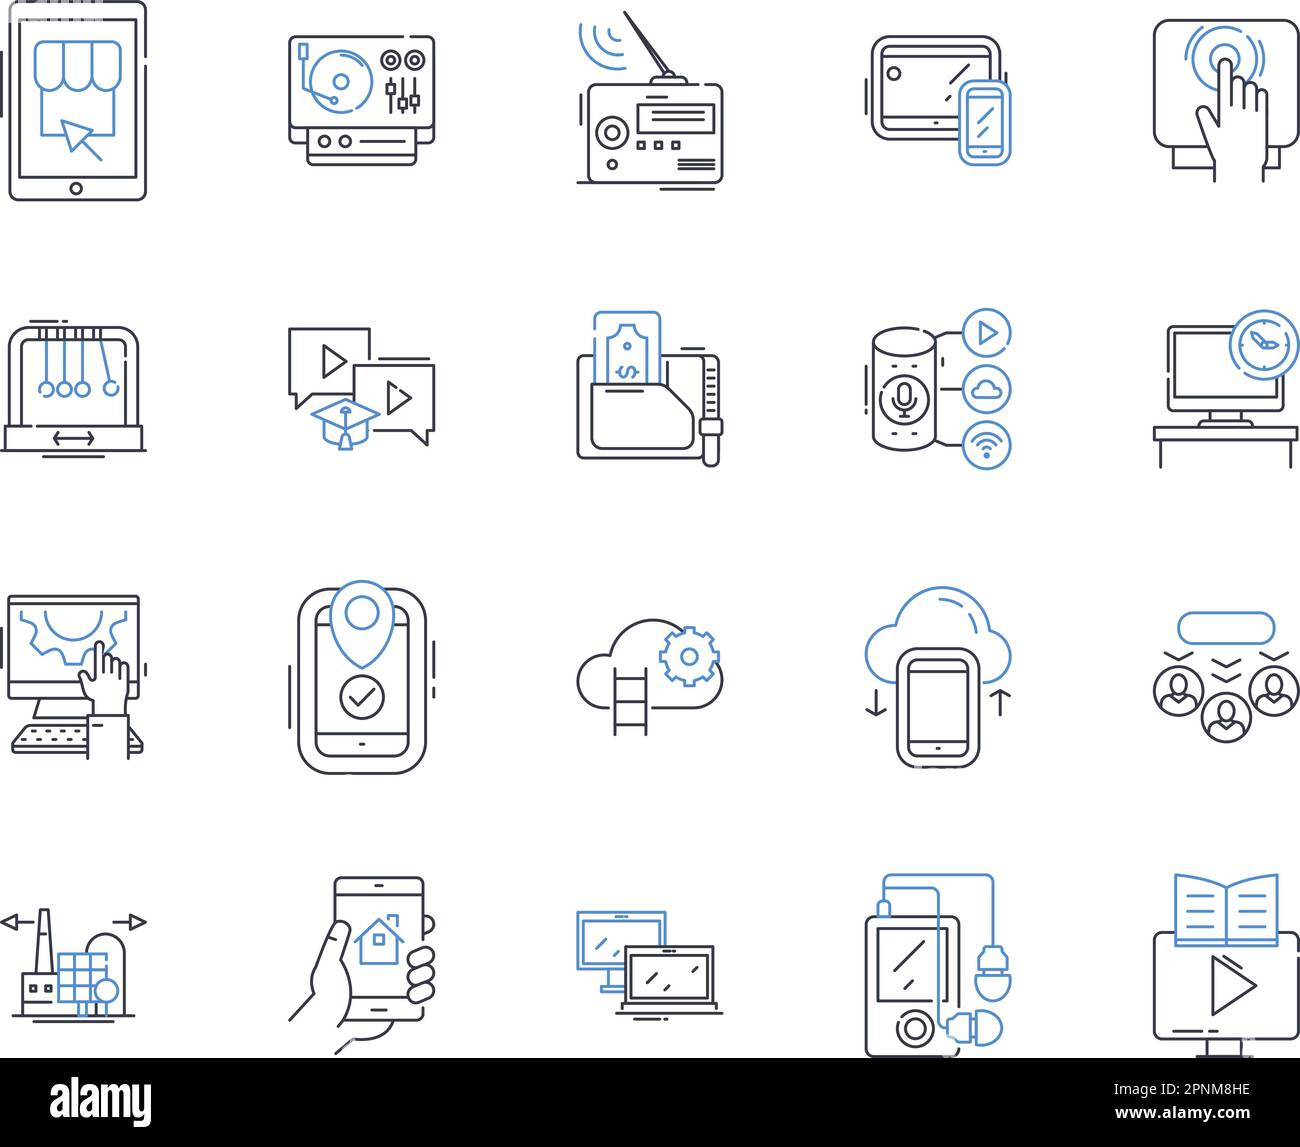 Mechanisms line icons collection. Gears, Springs, Levers, Cams, Belts, Chains, Pulleys vector and linear illustration. Shafts,Pistons,Couplings Stock Vector